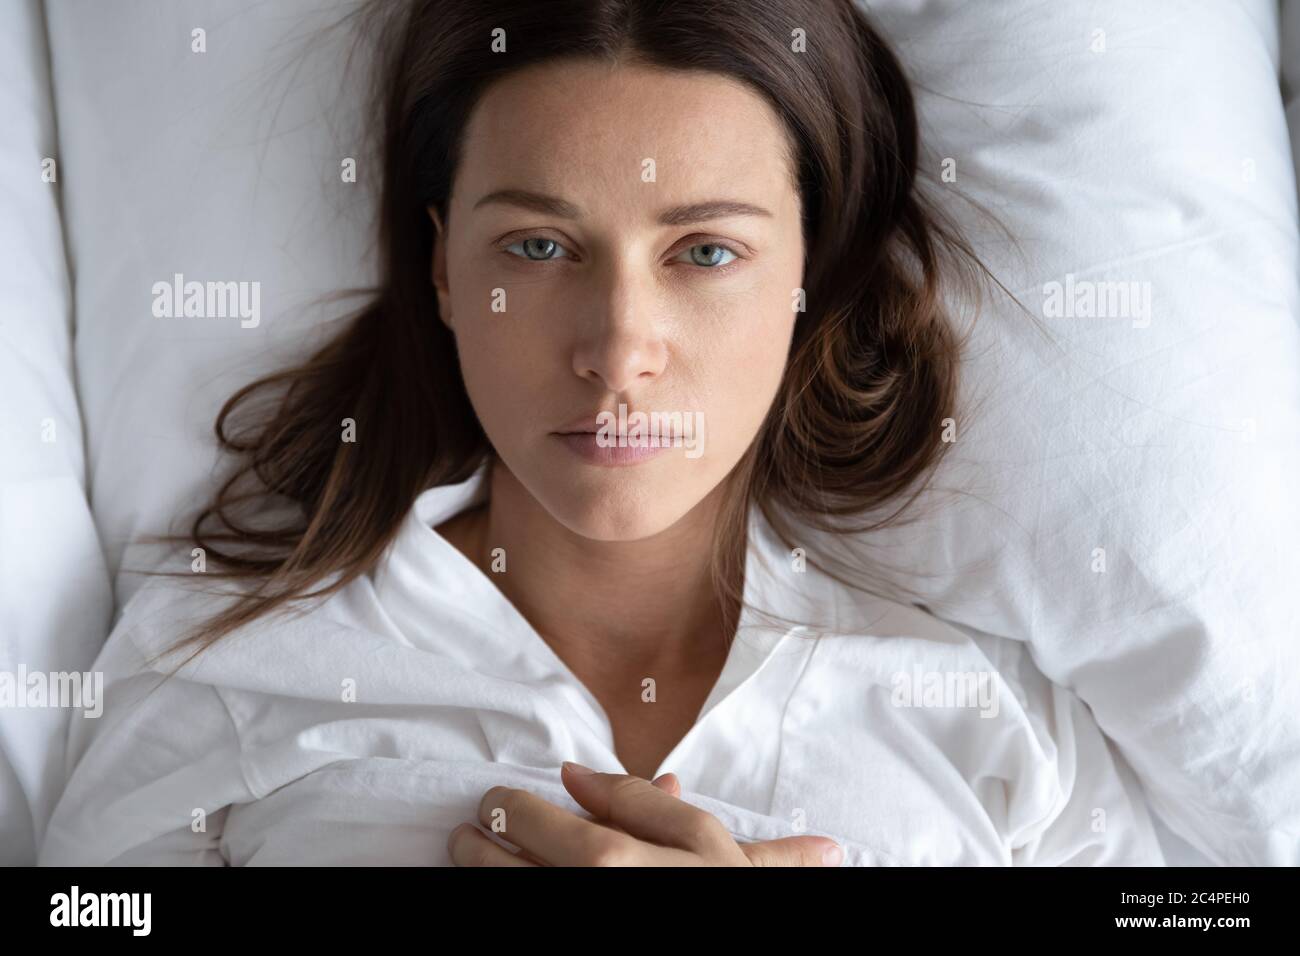 Depressed young woman rest in bed suffering from depression Stock Photo